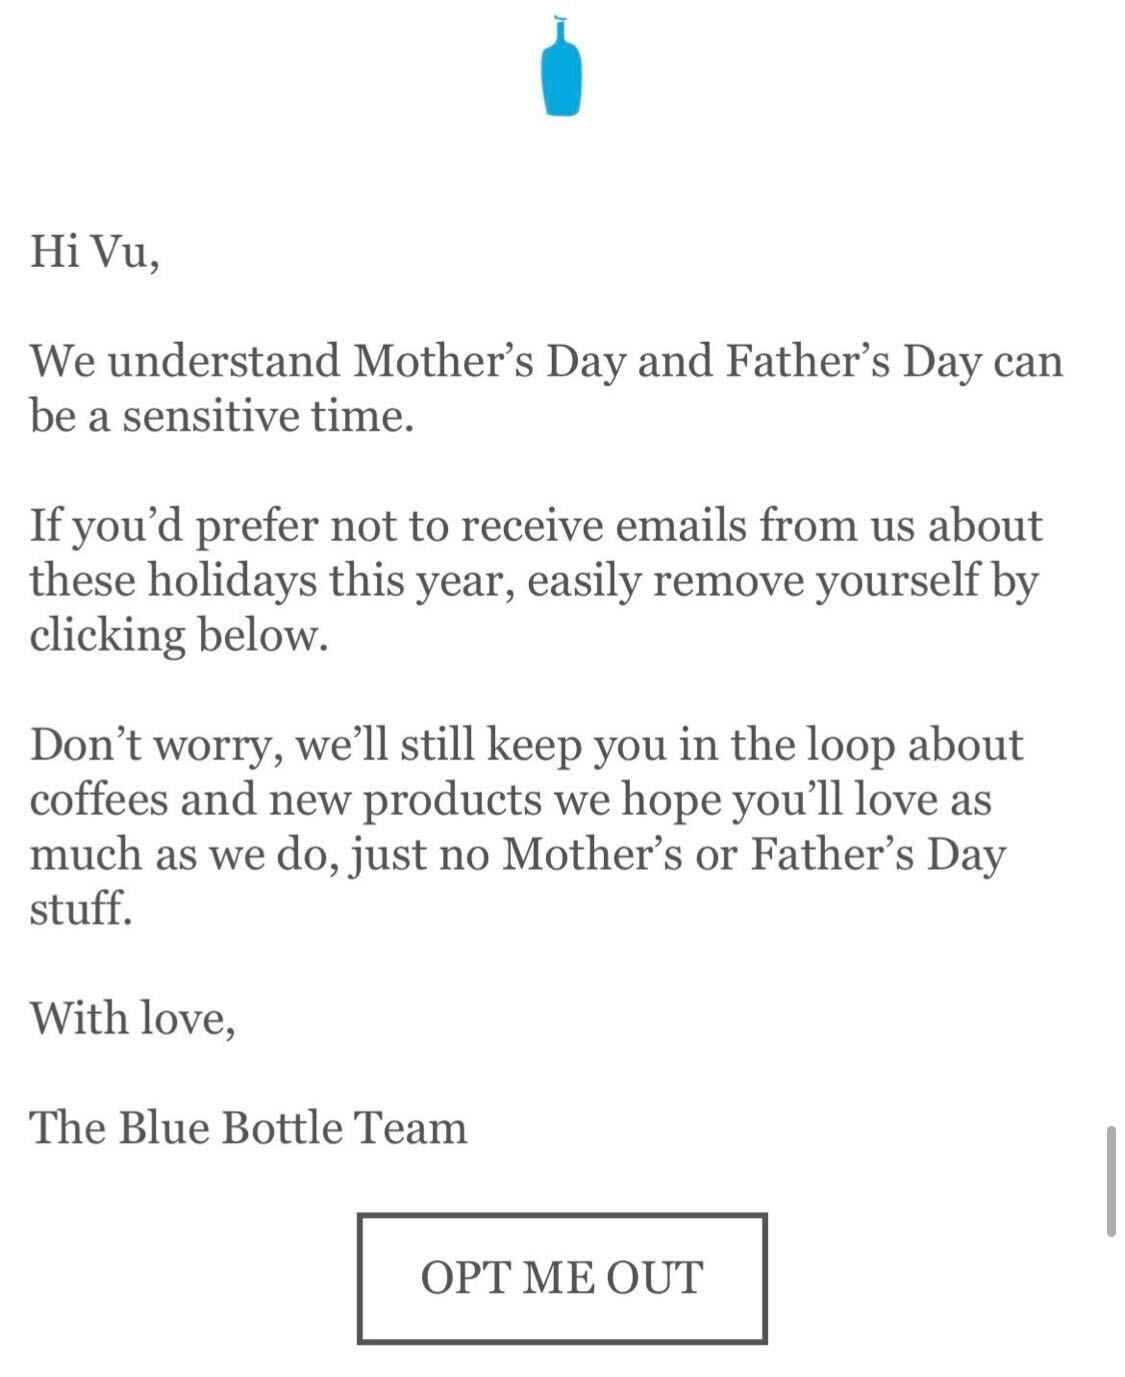 Blue Bottle Opt-Out